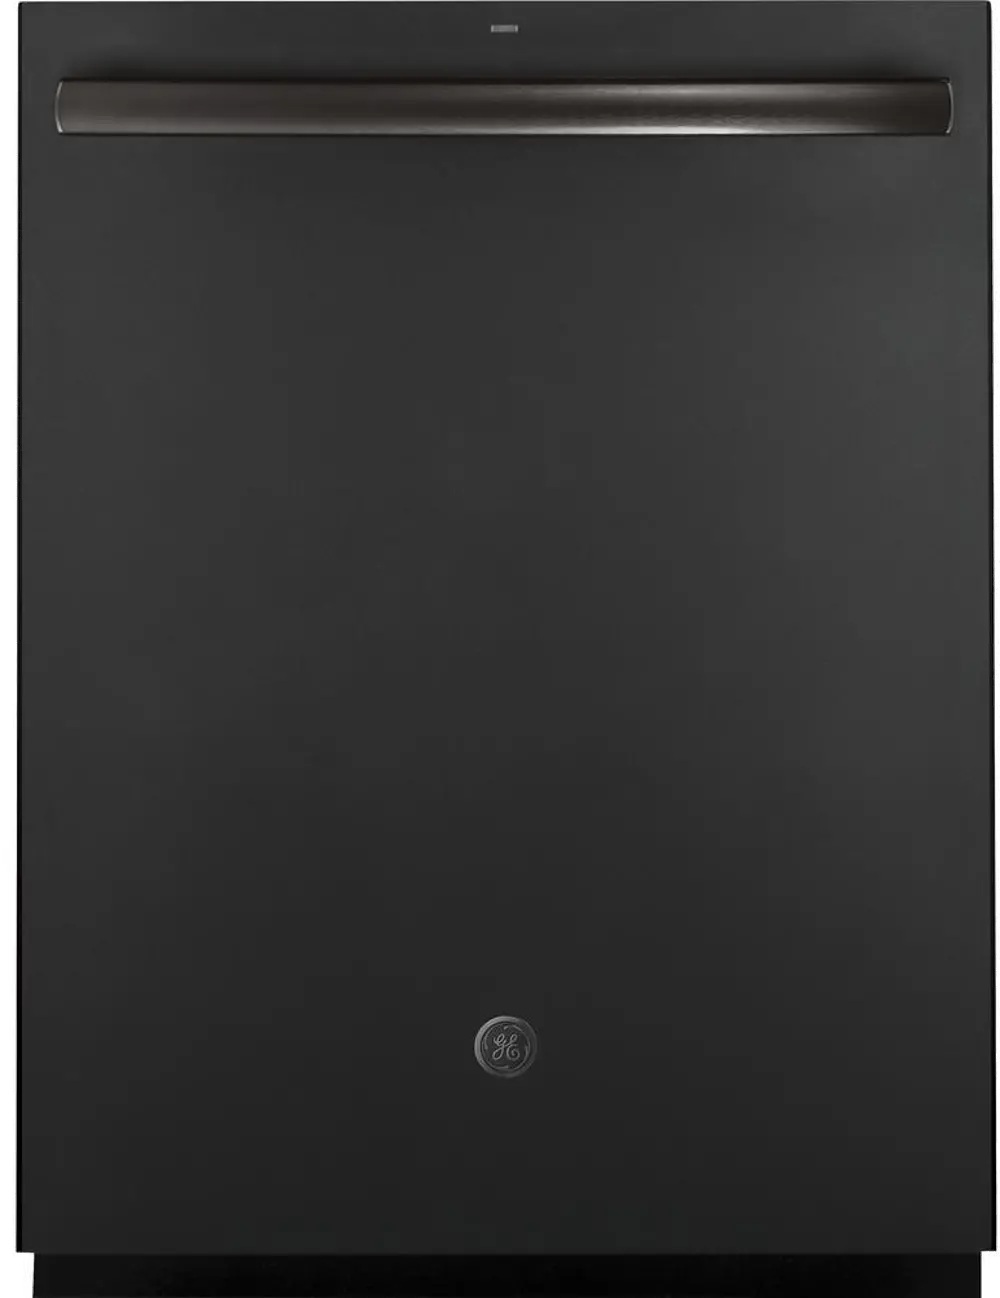 GDT695SFLDS GE Dishwasher - Black Slate with Stainless Steel Interior-1